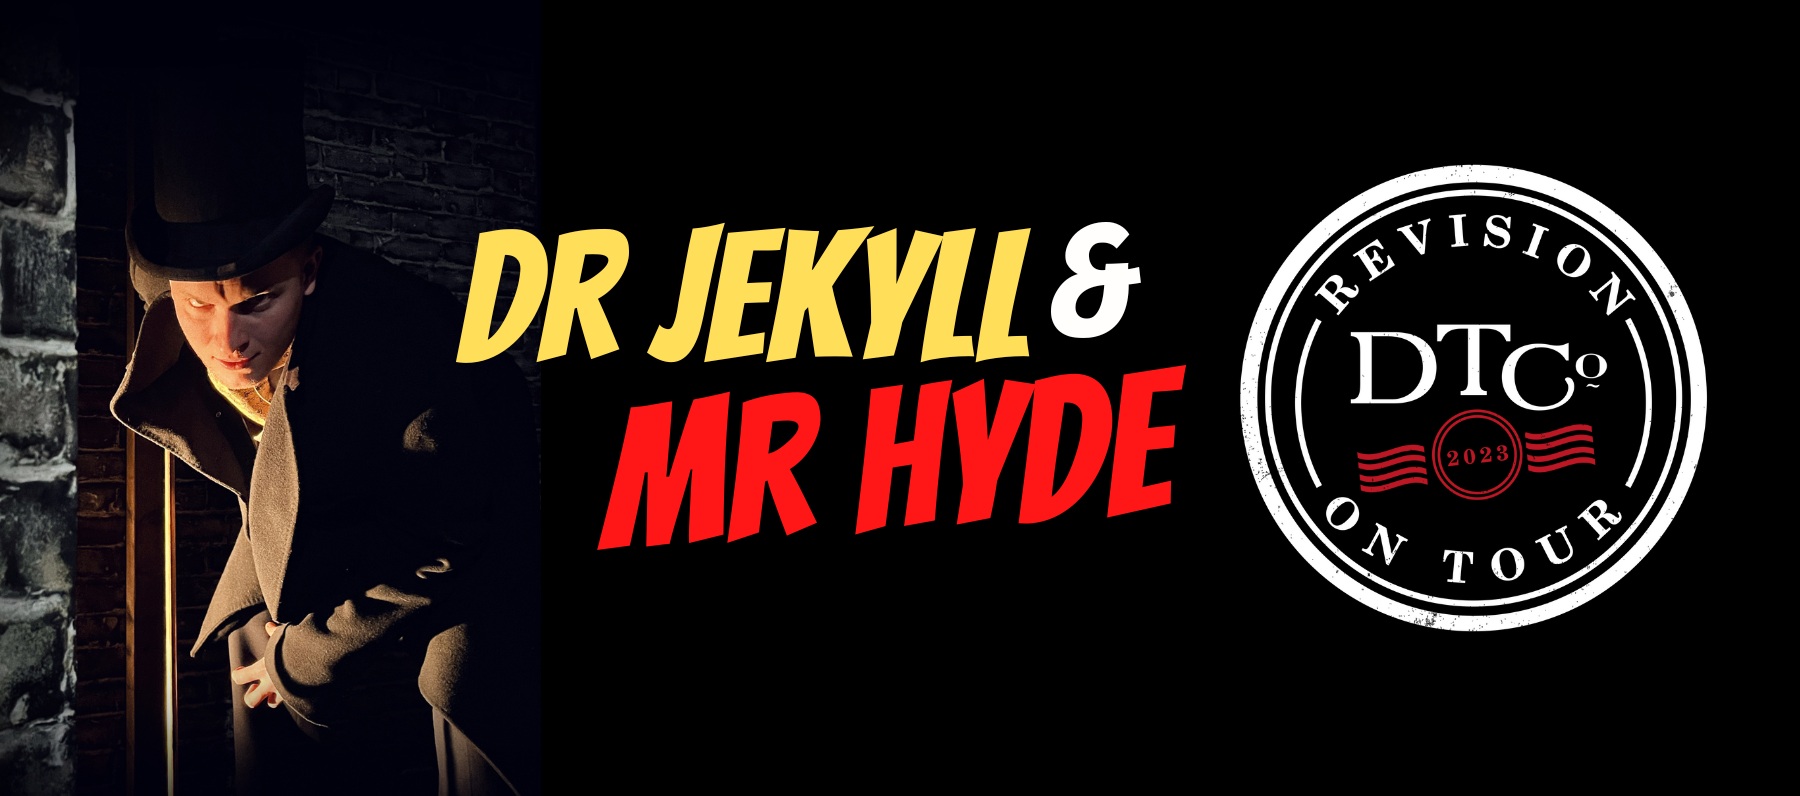 Dr Jekyll and Mr Hyde | Revision on Tour